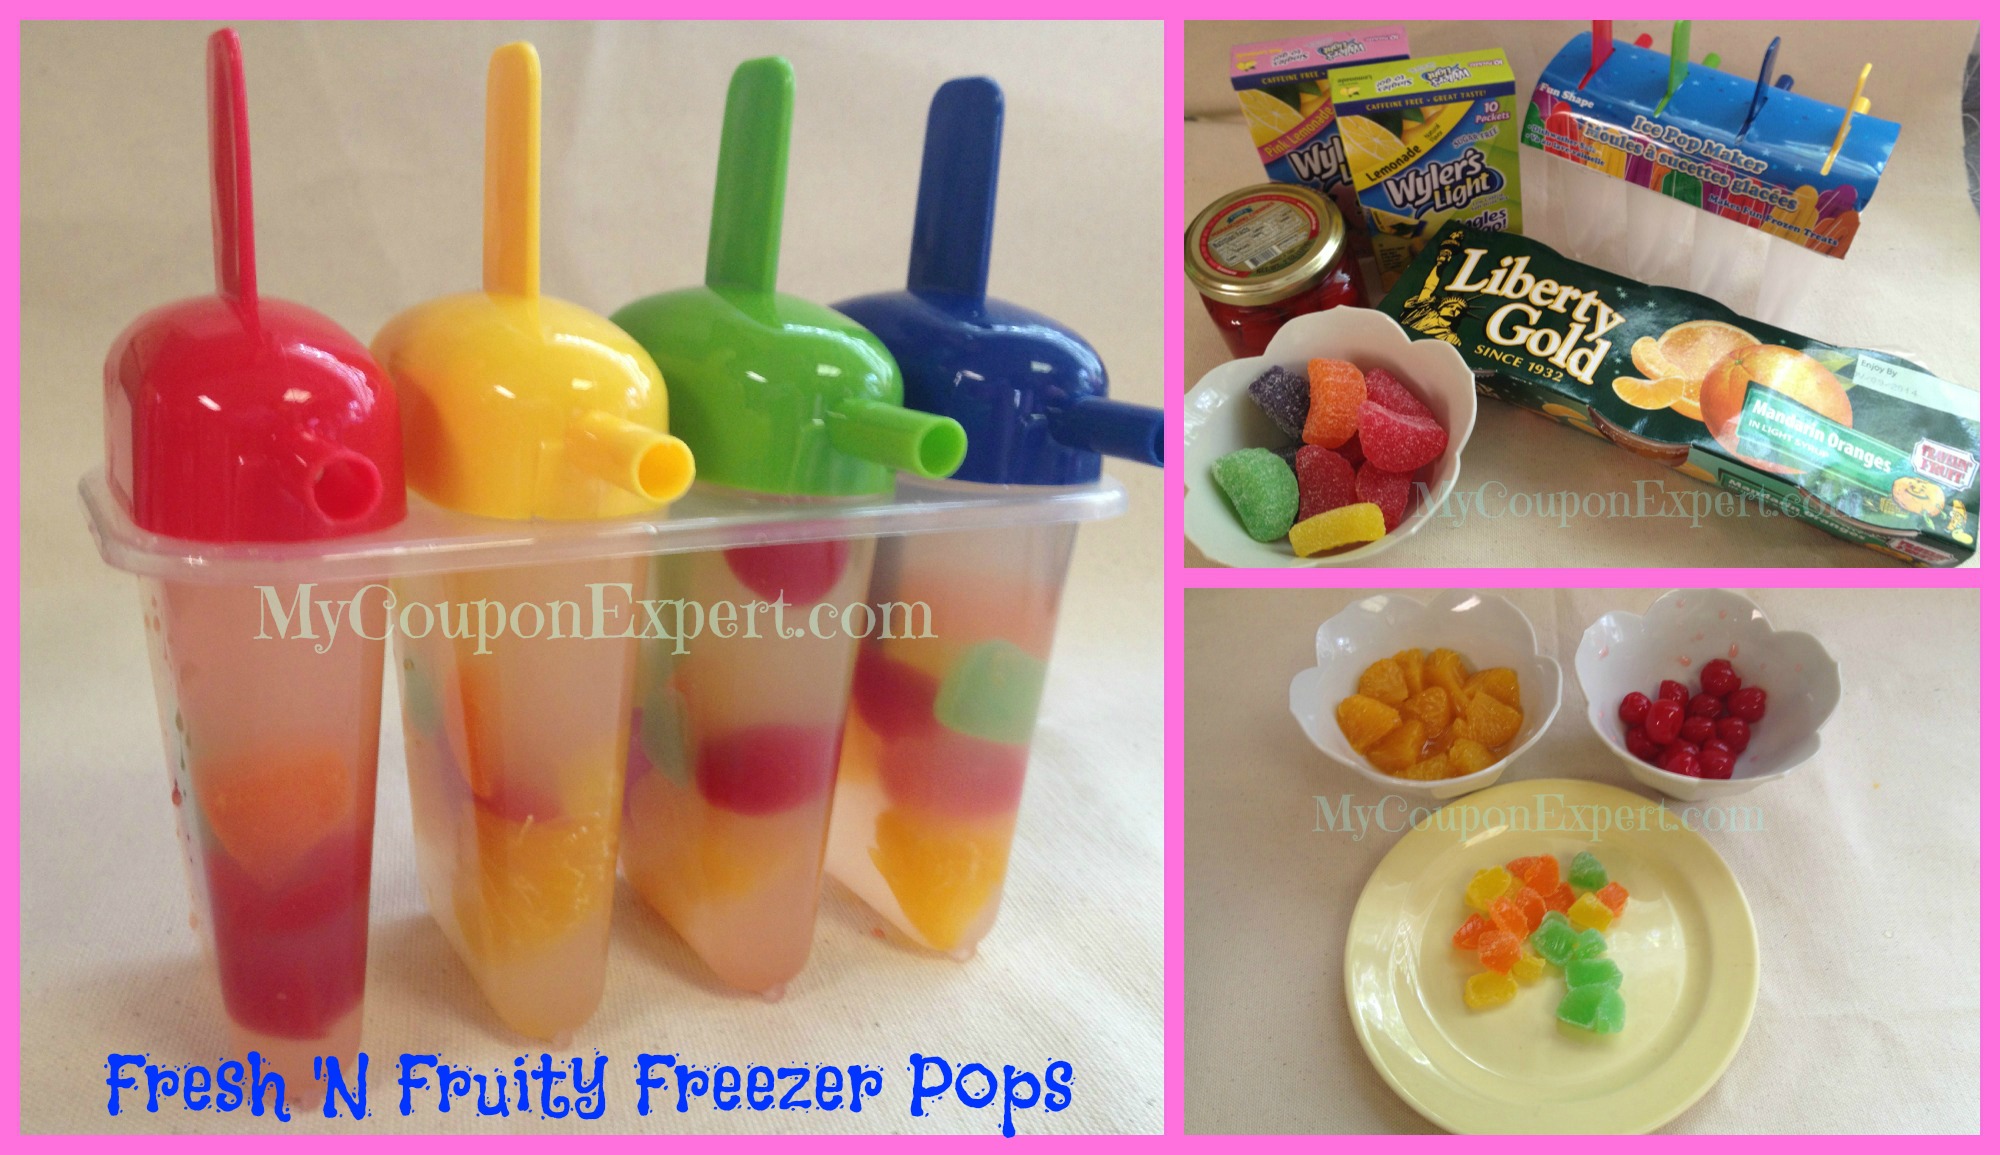 Fresh ‘N Fruity Freezer Pops!  You are going to LOVE this!